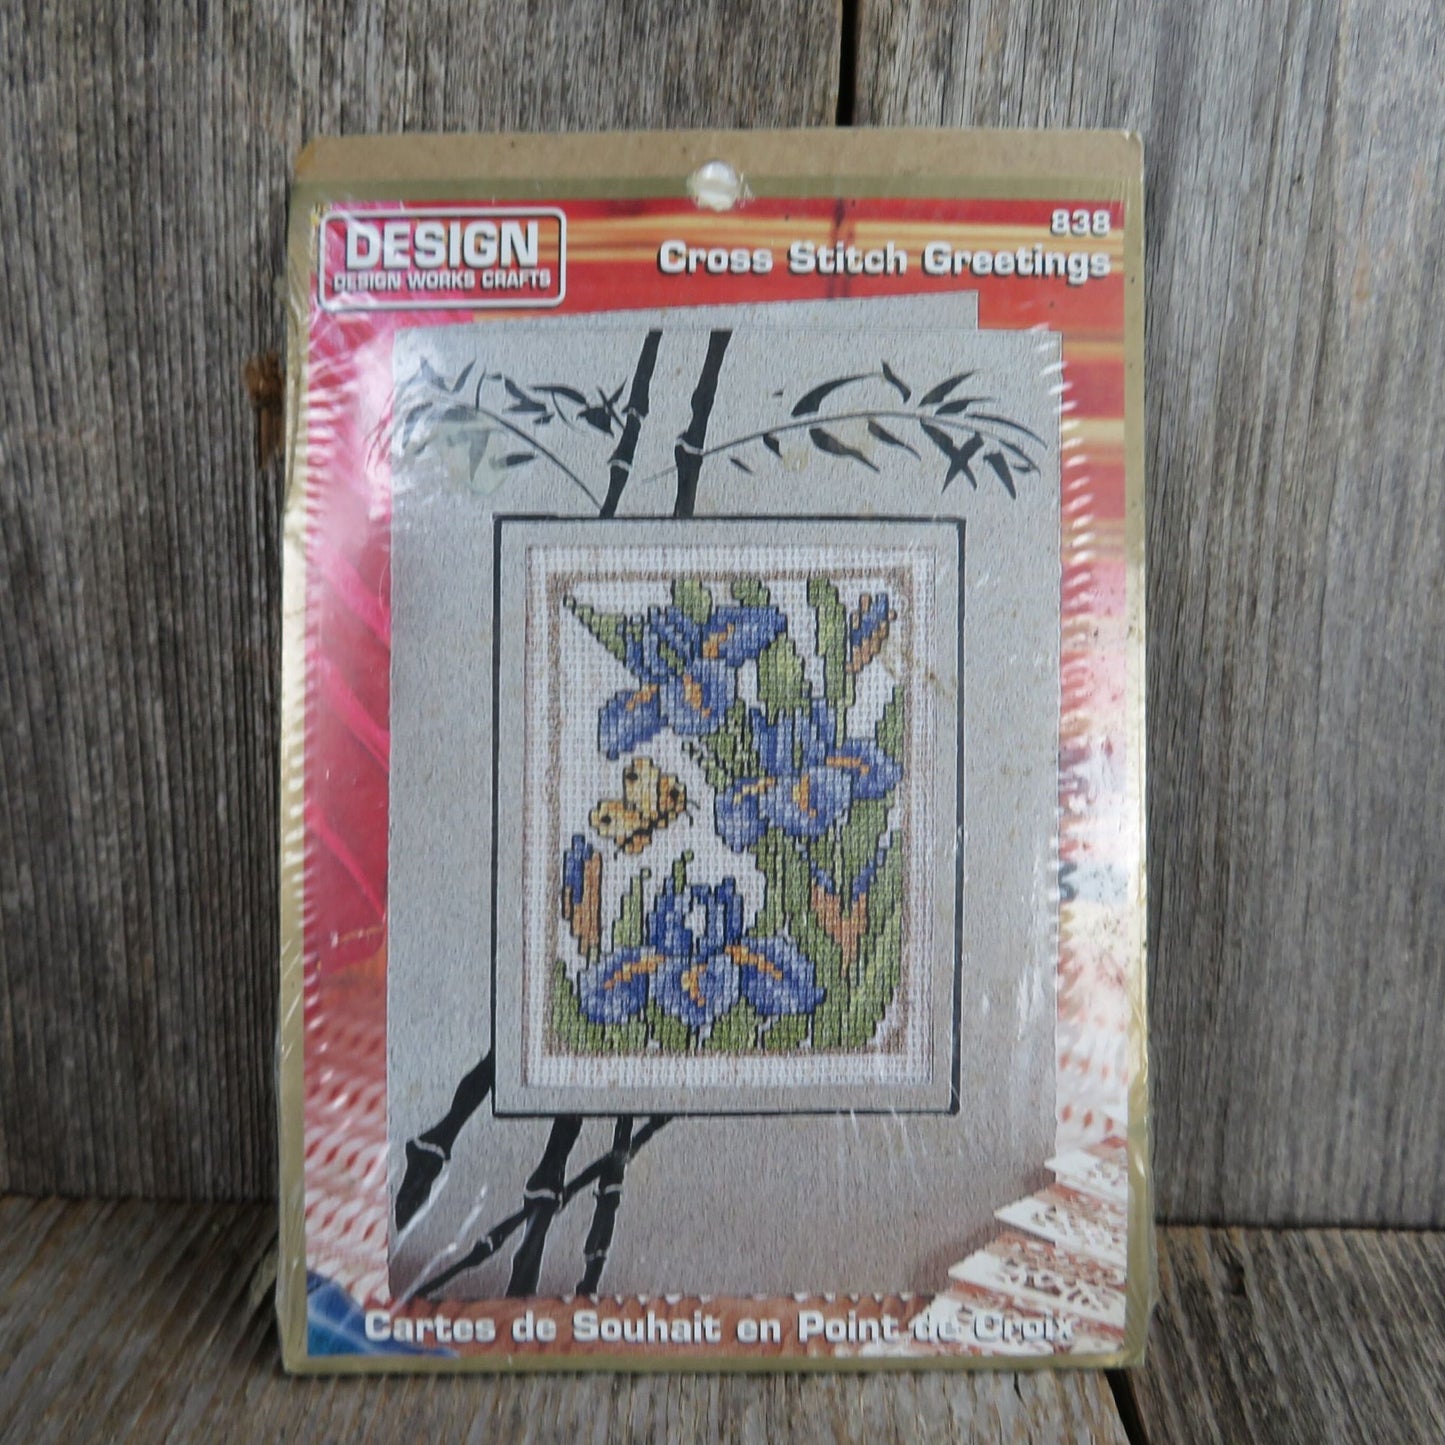 Counted Cross Stitch Greeting Card Kit Iris Flowers Design Works Crafts 838